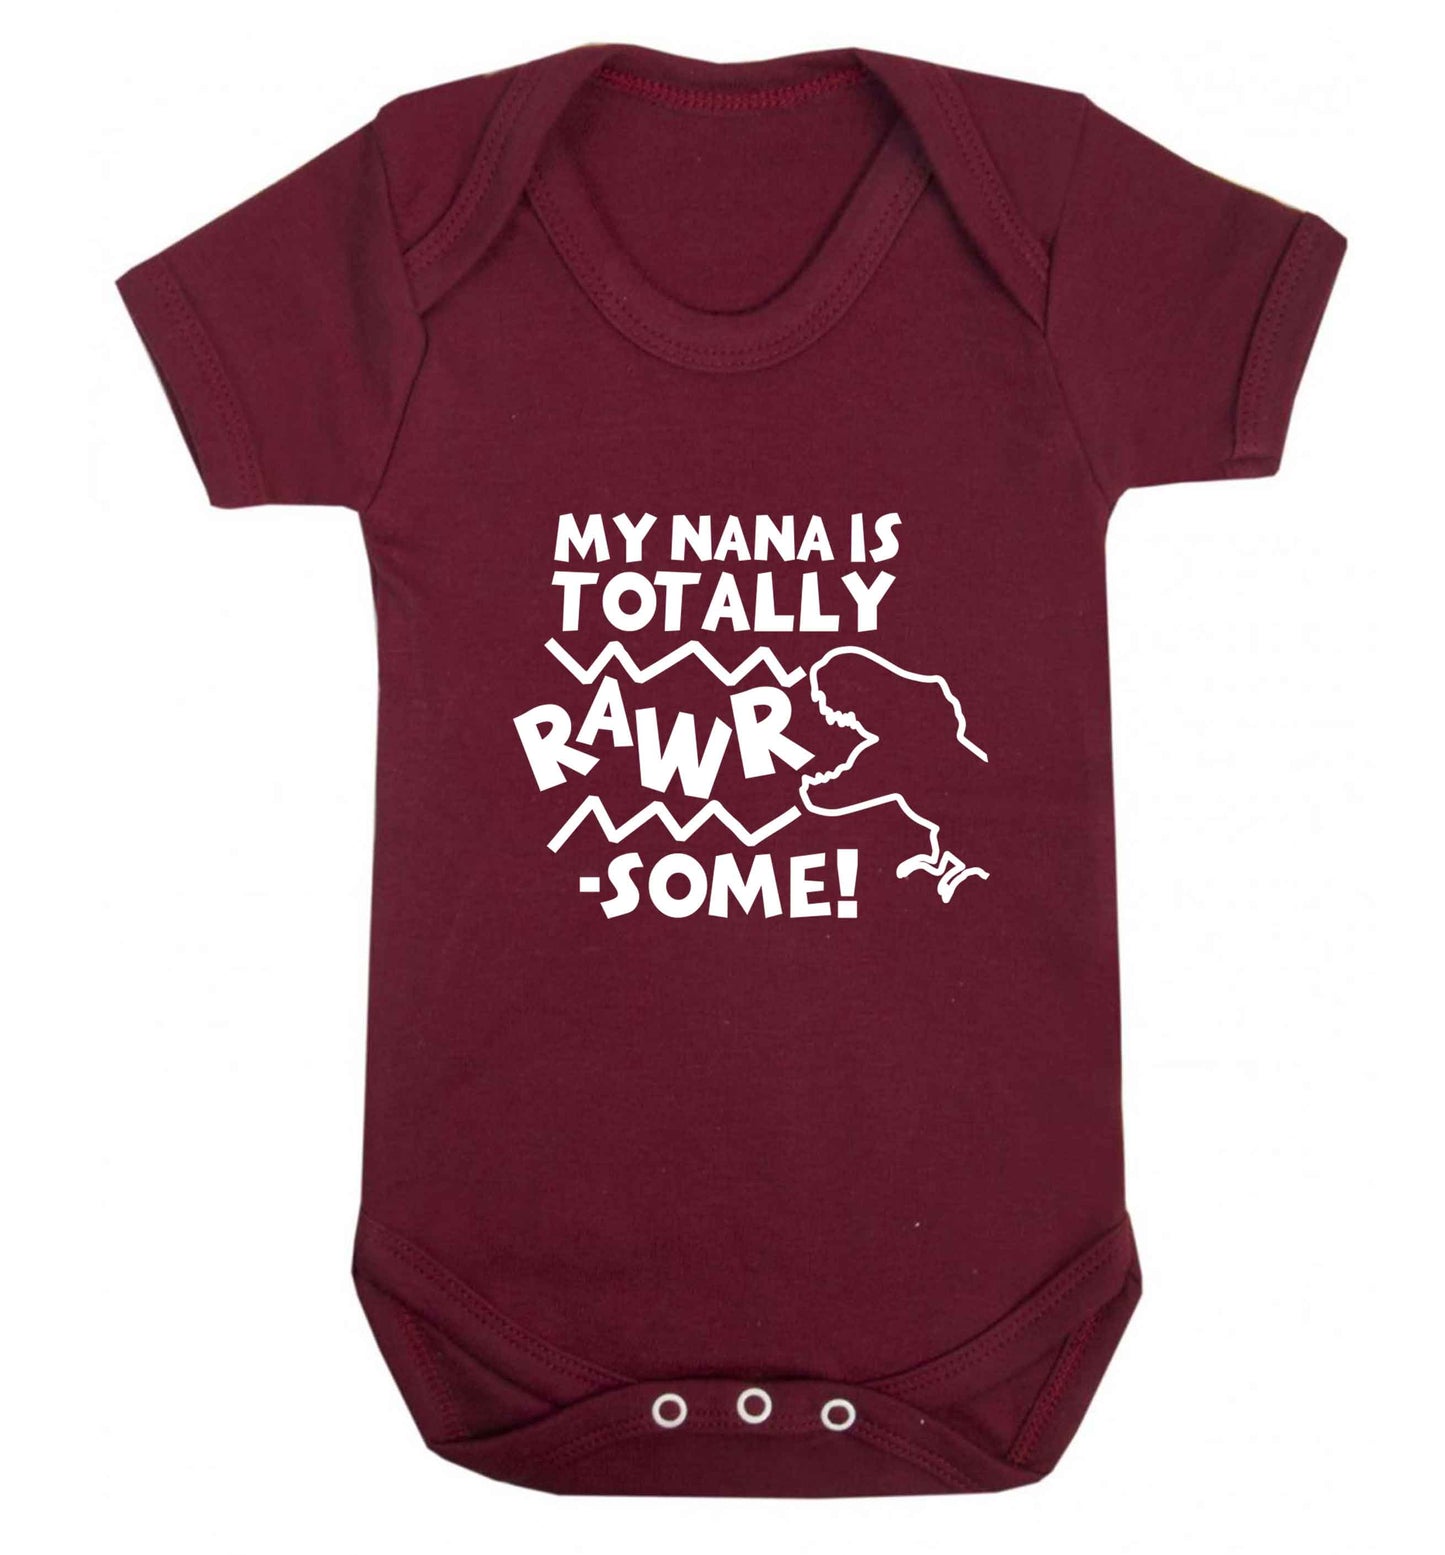 My nana is totally rawrsome baby vest maroon 18-24 months